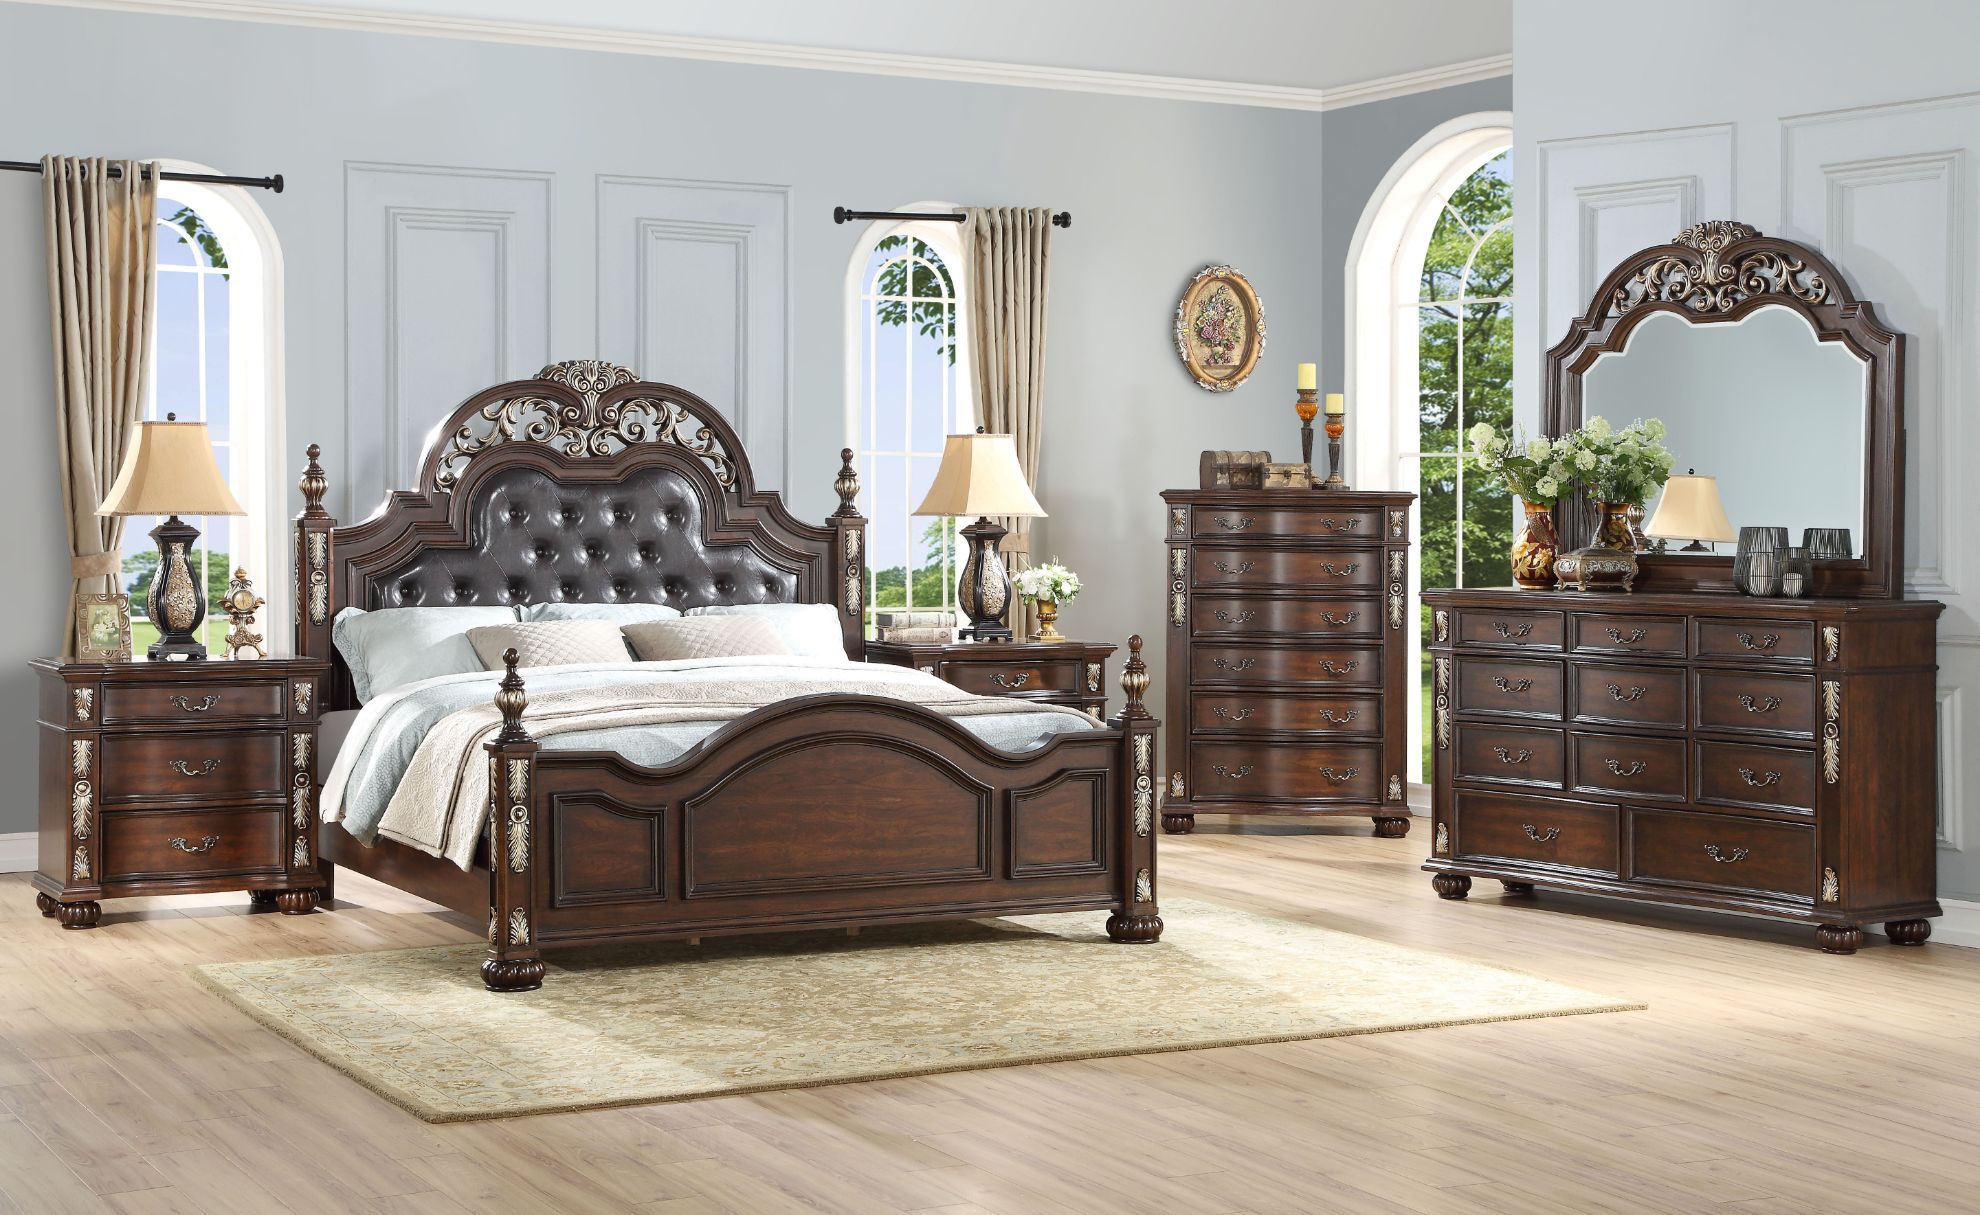 Picture of Maximus King Bedroom Set